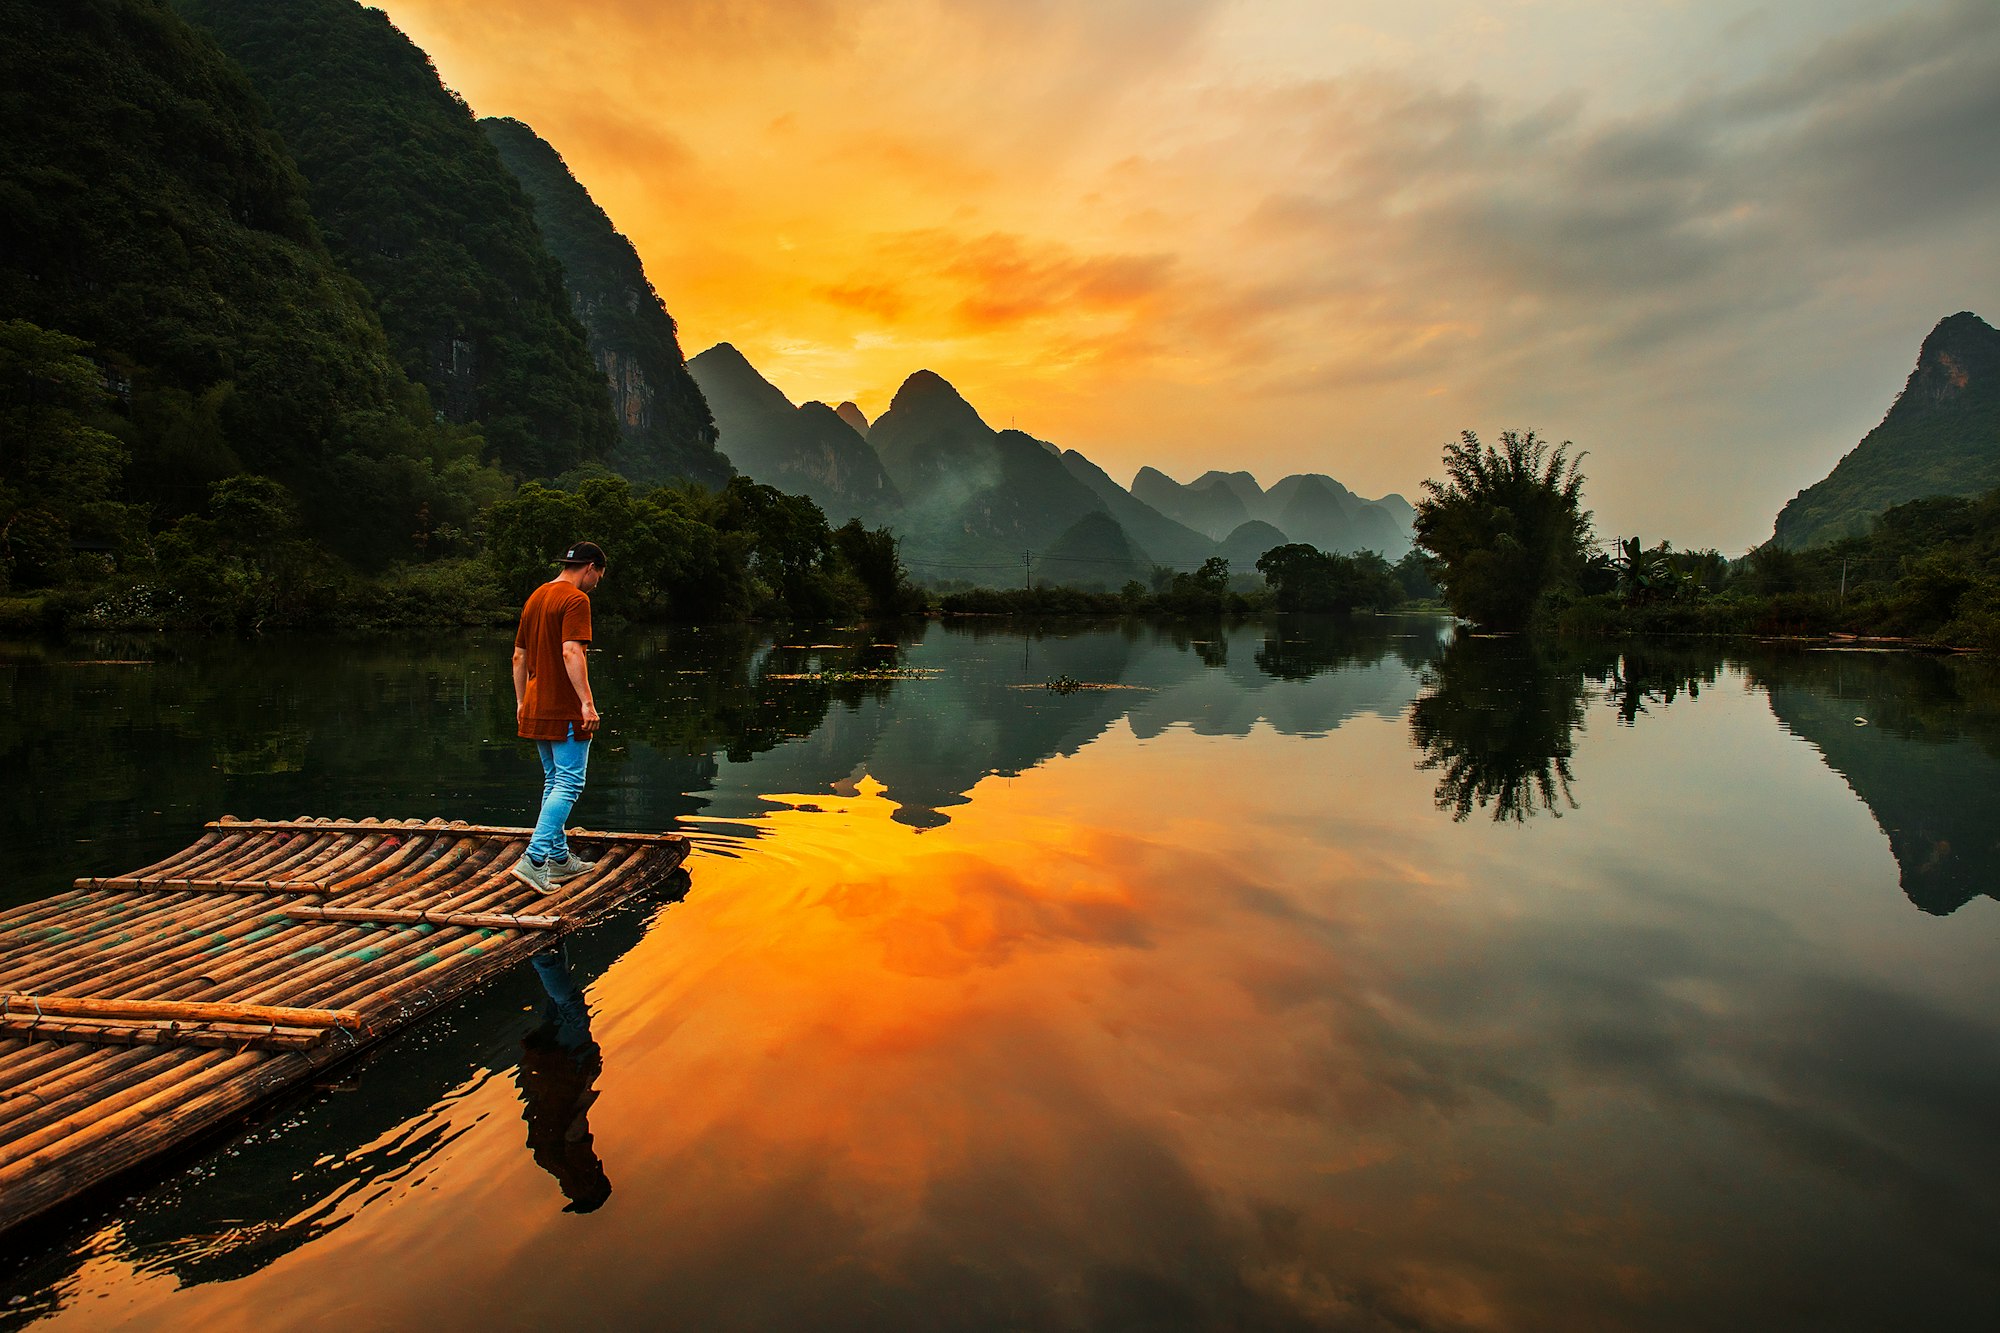 Check out more photos from my time in Yangshuo at www.morethanjust.photos/yangshuo